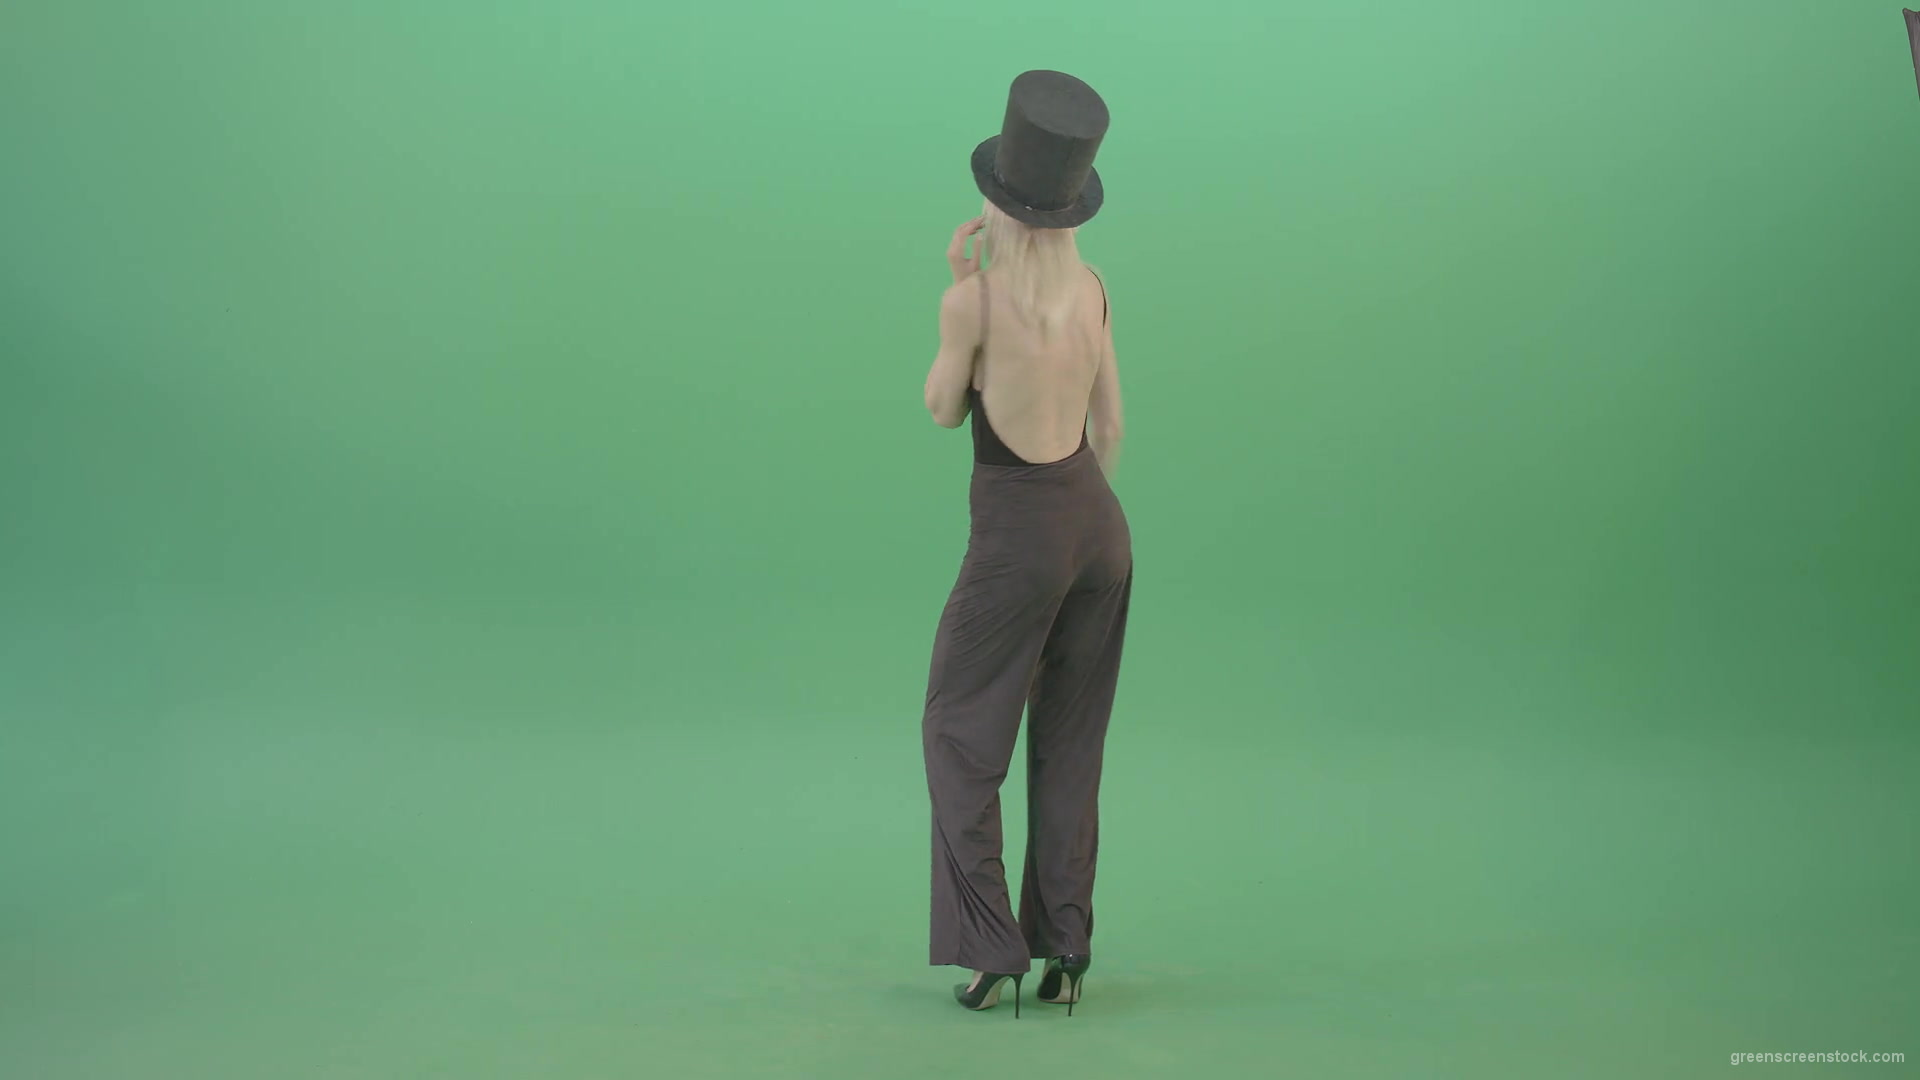 Magic-elegant-dancing-girl-slowly-moving-on-green-background-4K-Video-Footage-1920_009 Green Screen Stock